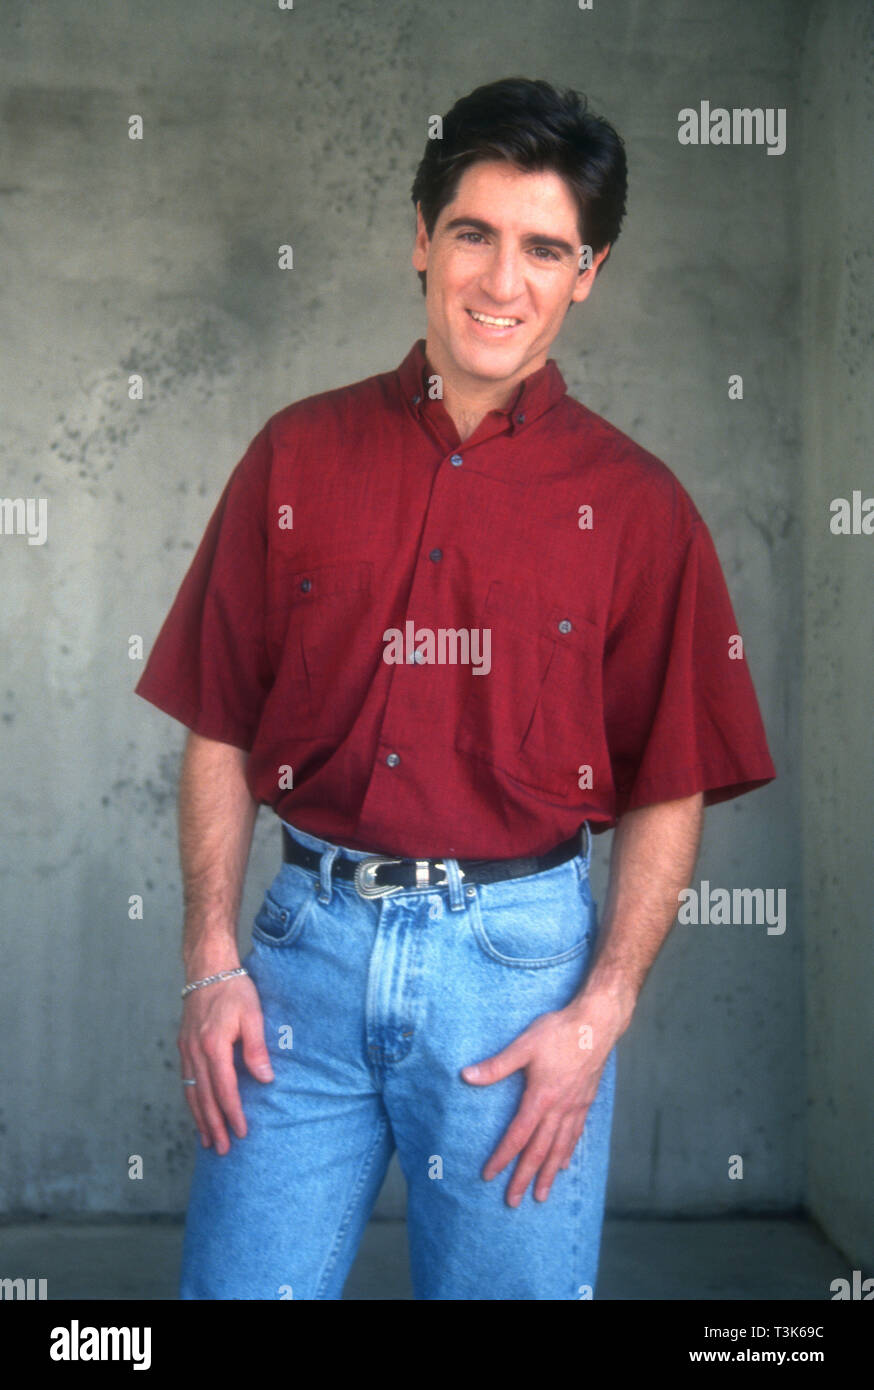 Los Angeles, California, USA 17th March 1994 (Exclusive) American Stand-up Comedian Carlos Alazraqui poses at a photo shoot on March 17, 1994 in Los Angeles, California, USA. Photo by Barry King/Alamy Stock Photo Stock Photo